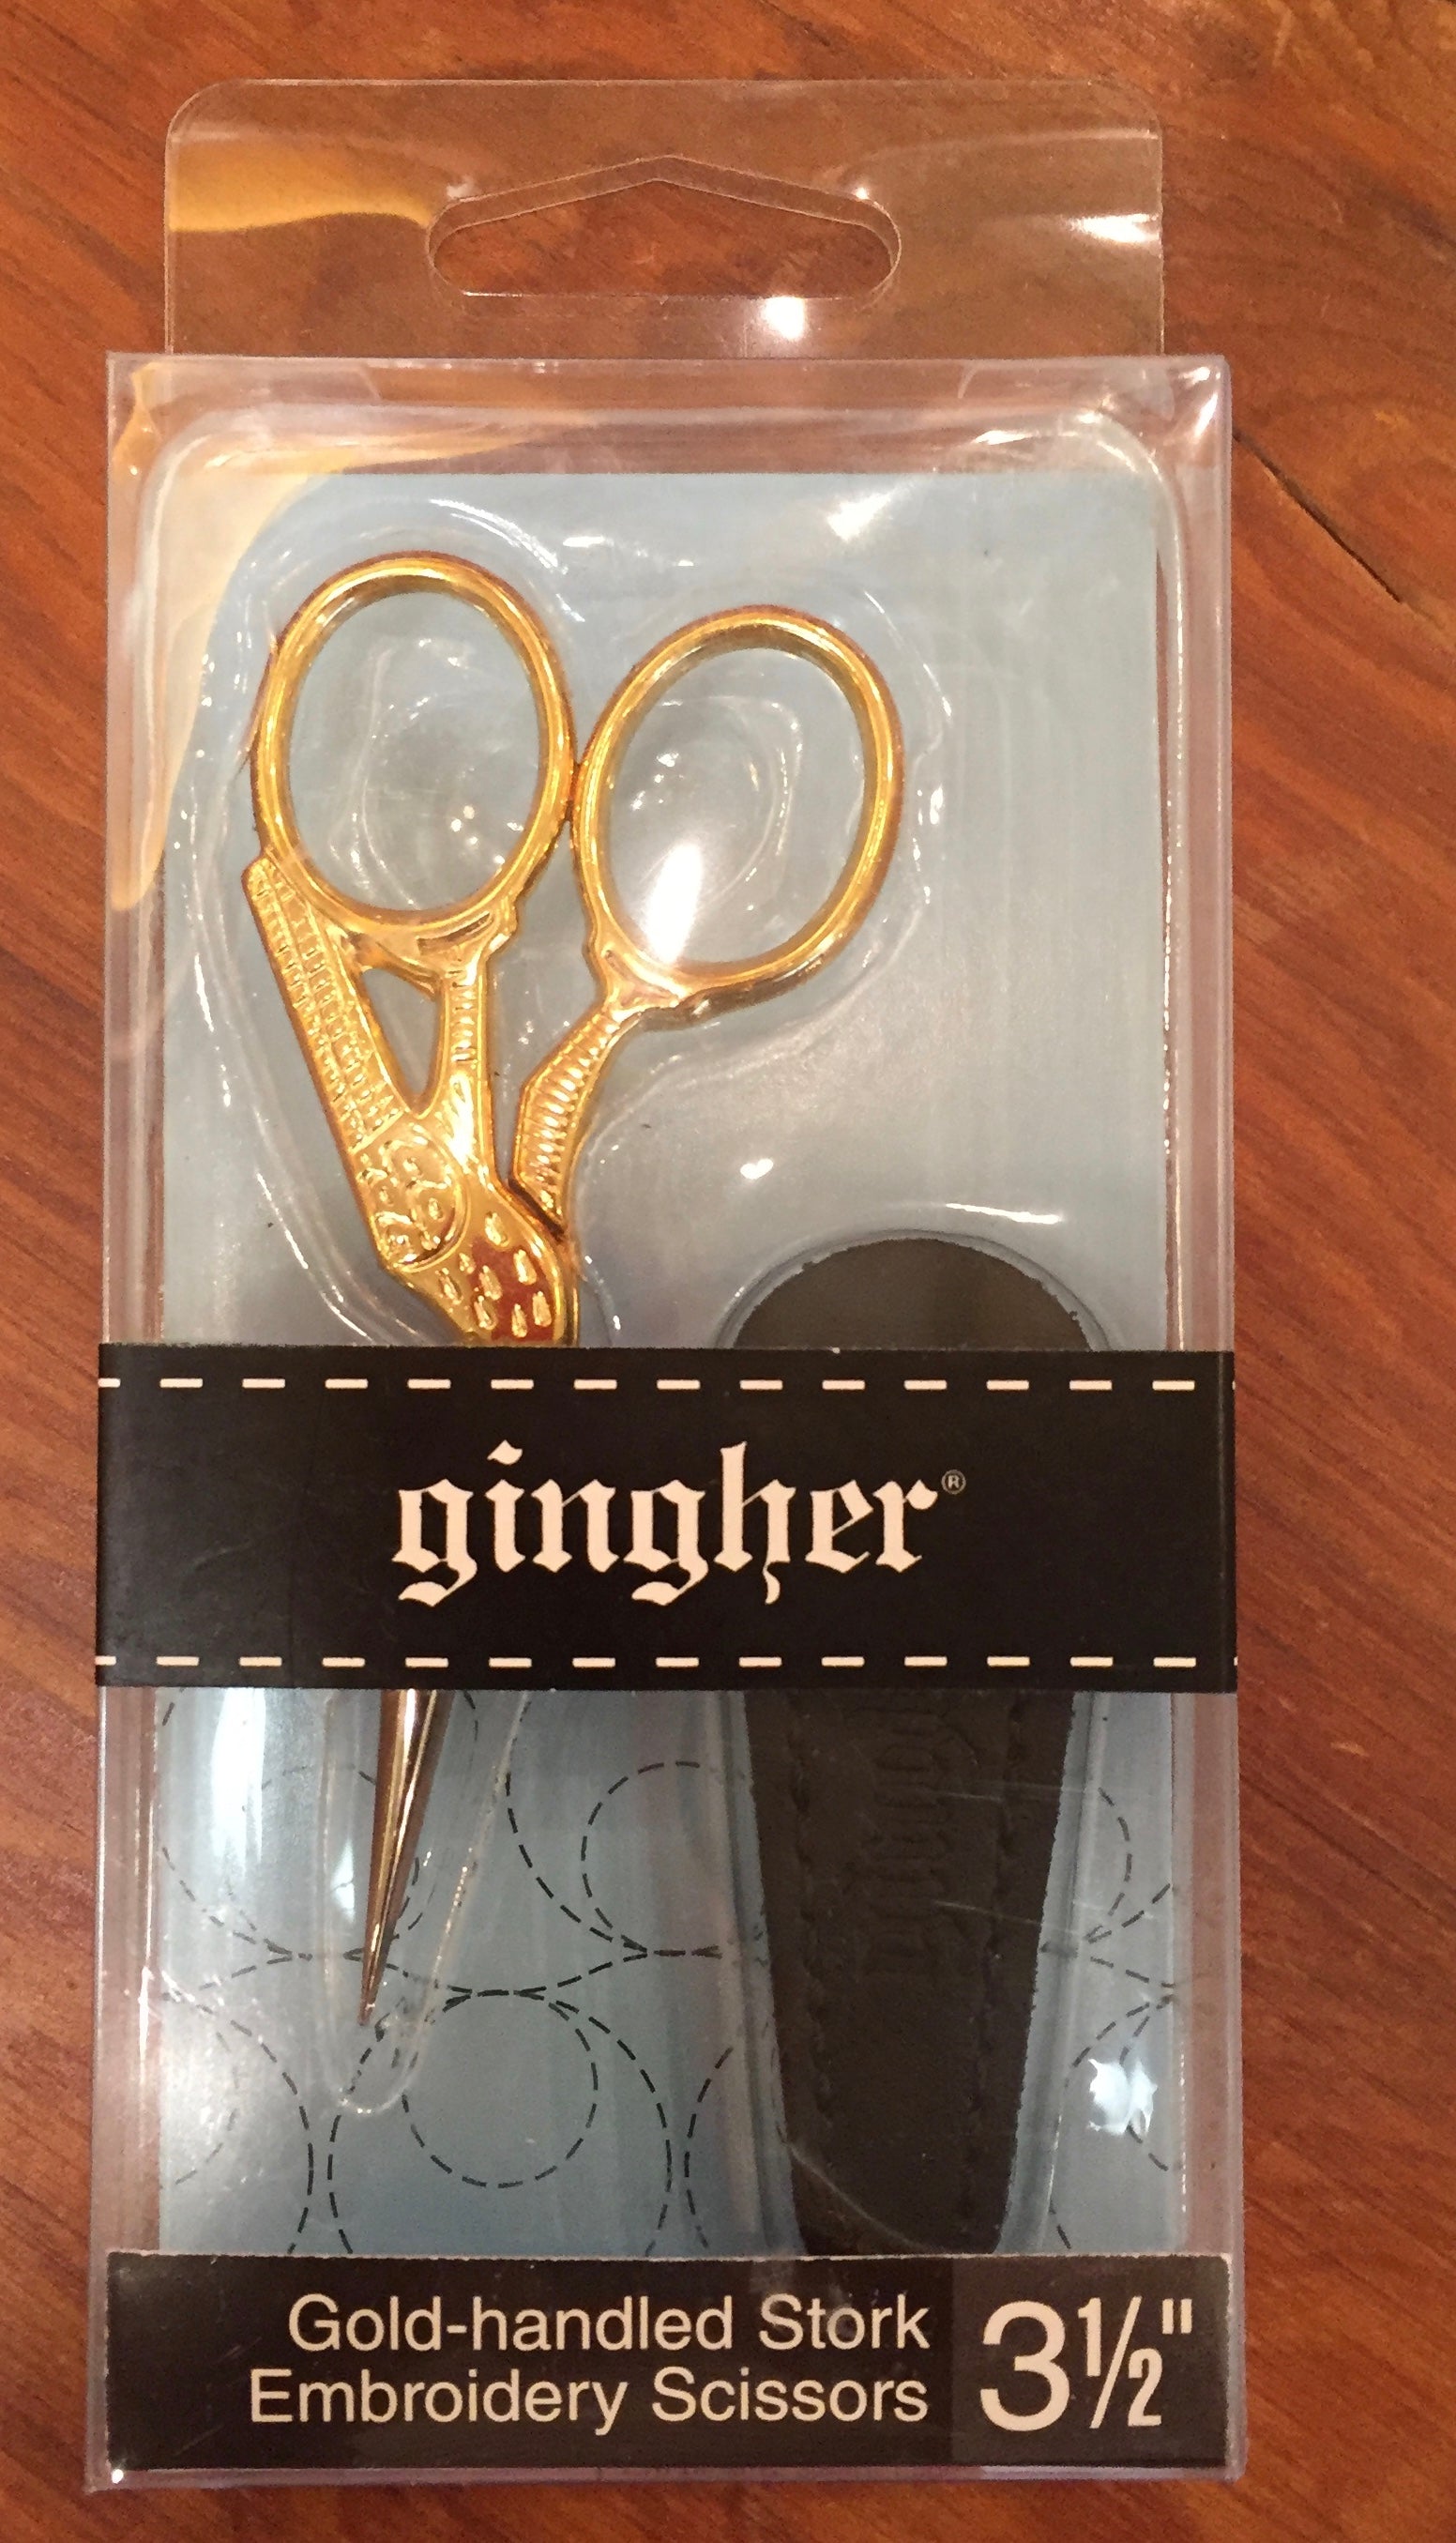 Gingher Stork Embroidery Scissors, 3 1/2